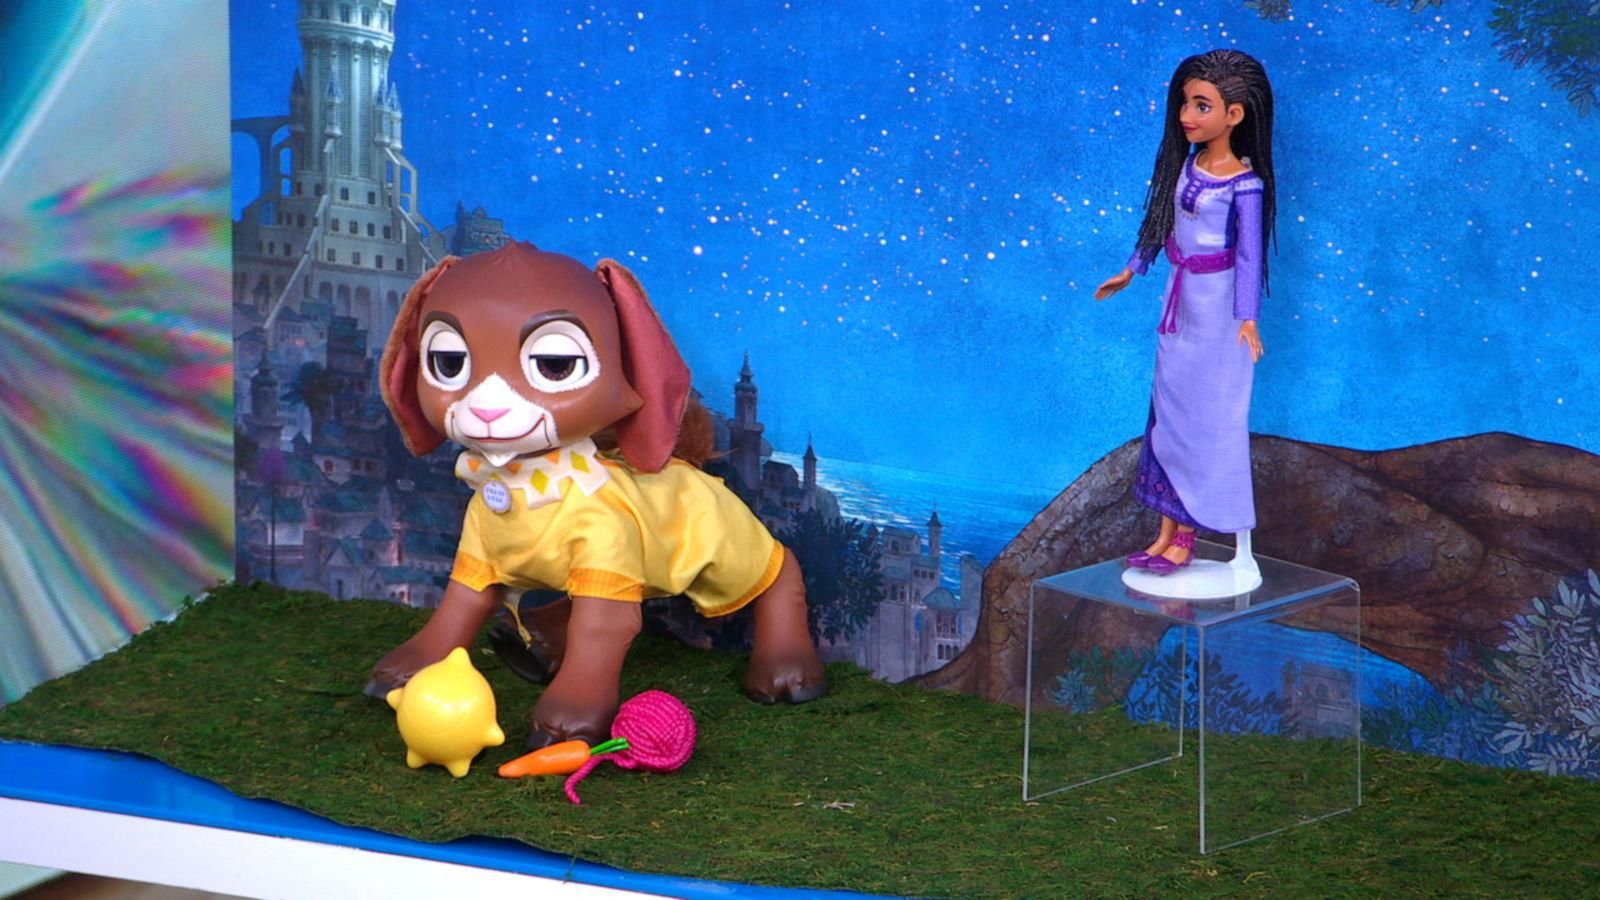 A look at new toys from the world of Disney - Good Morning America